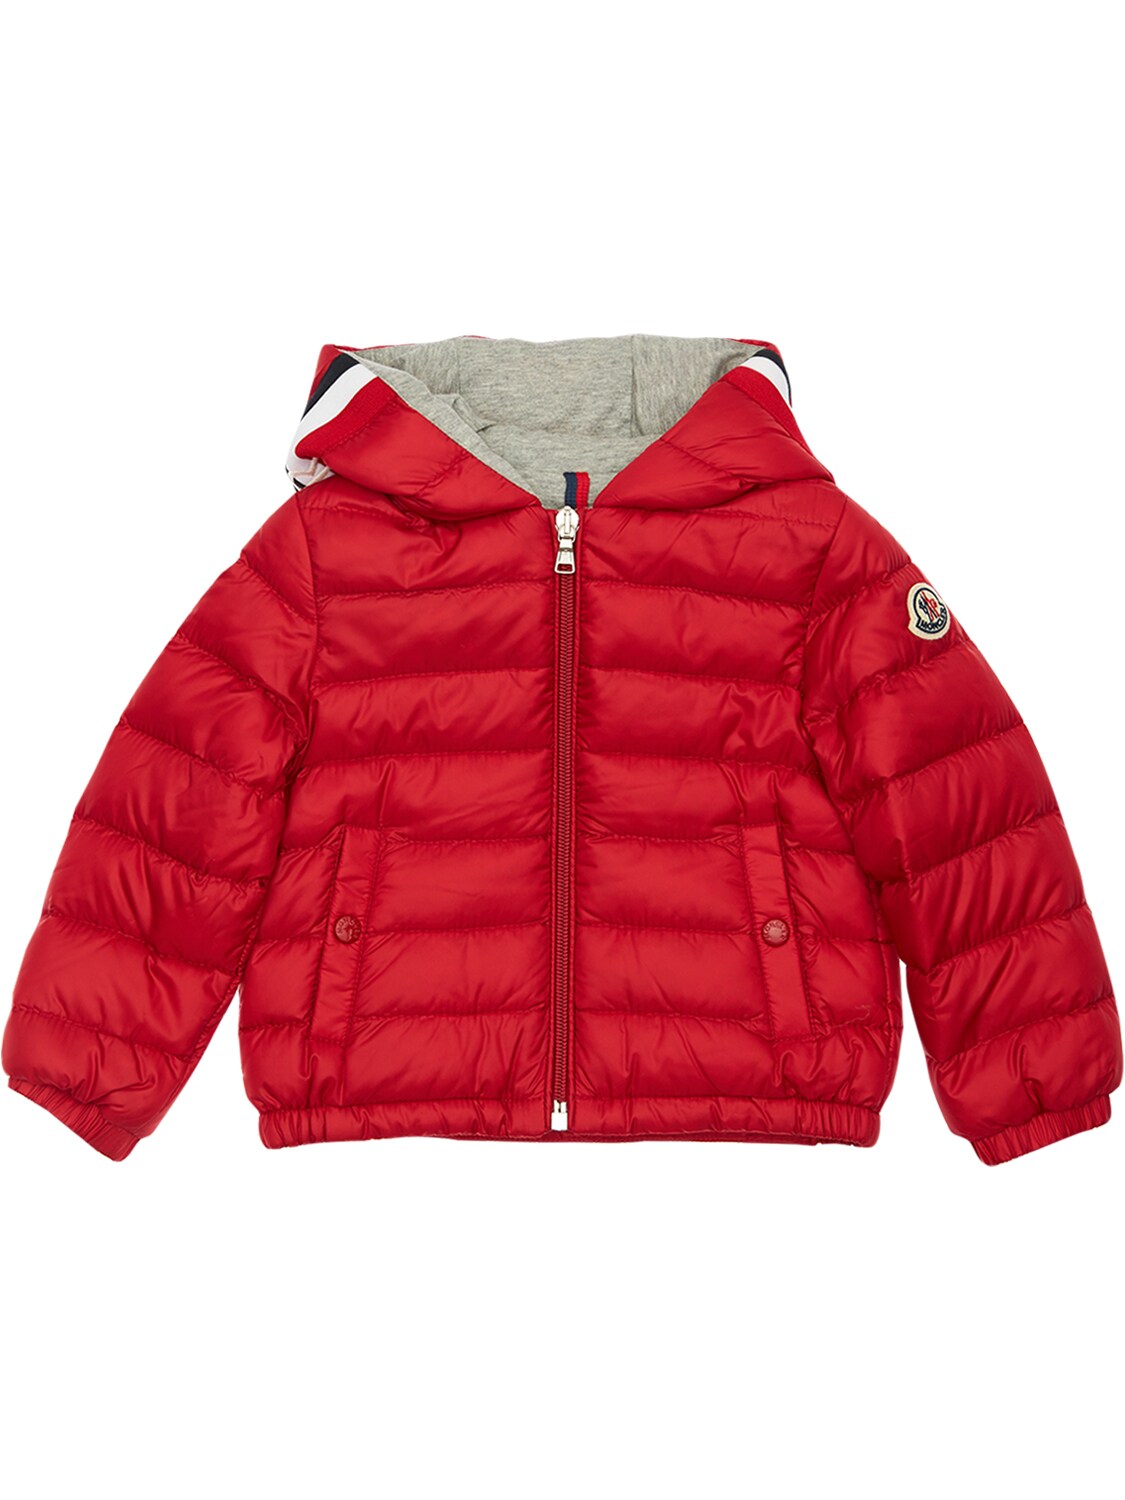 Moncler Kids' Gaddy Nylon Down Jacket In Red